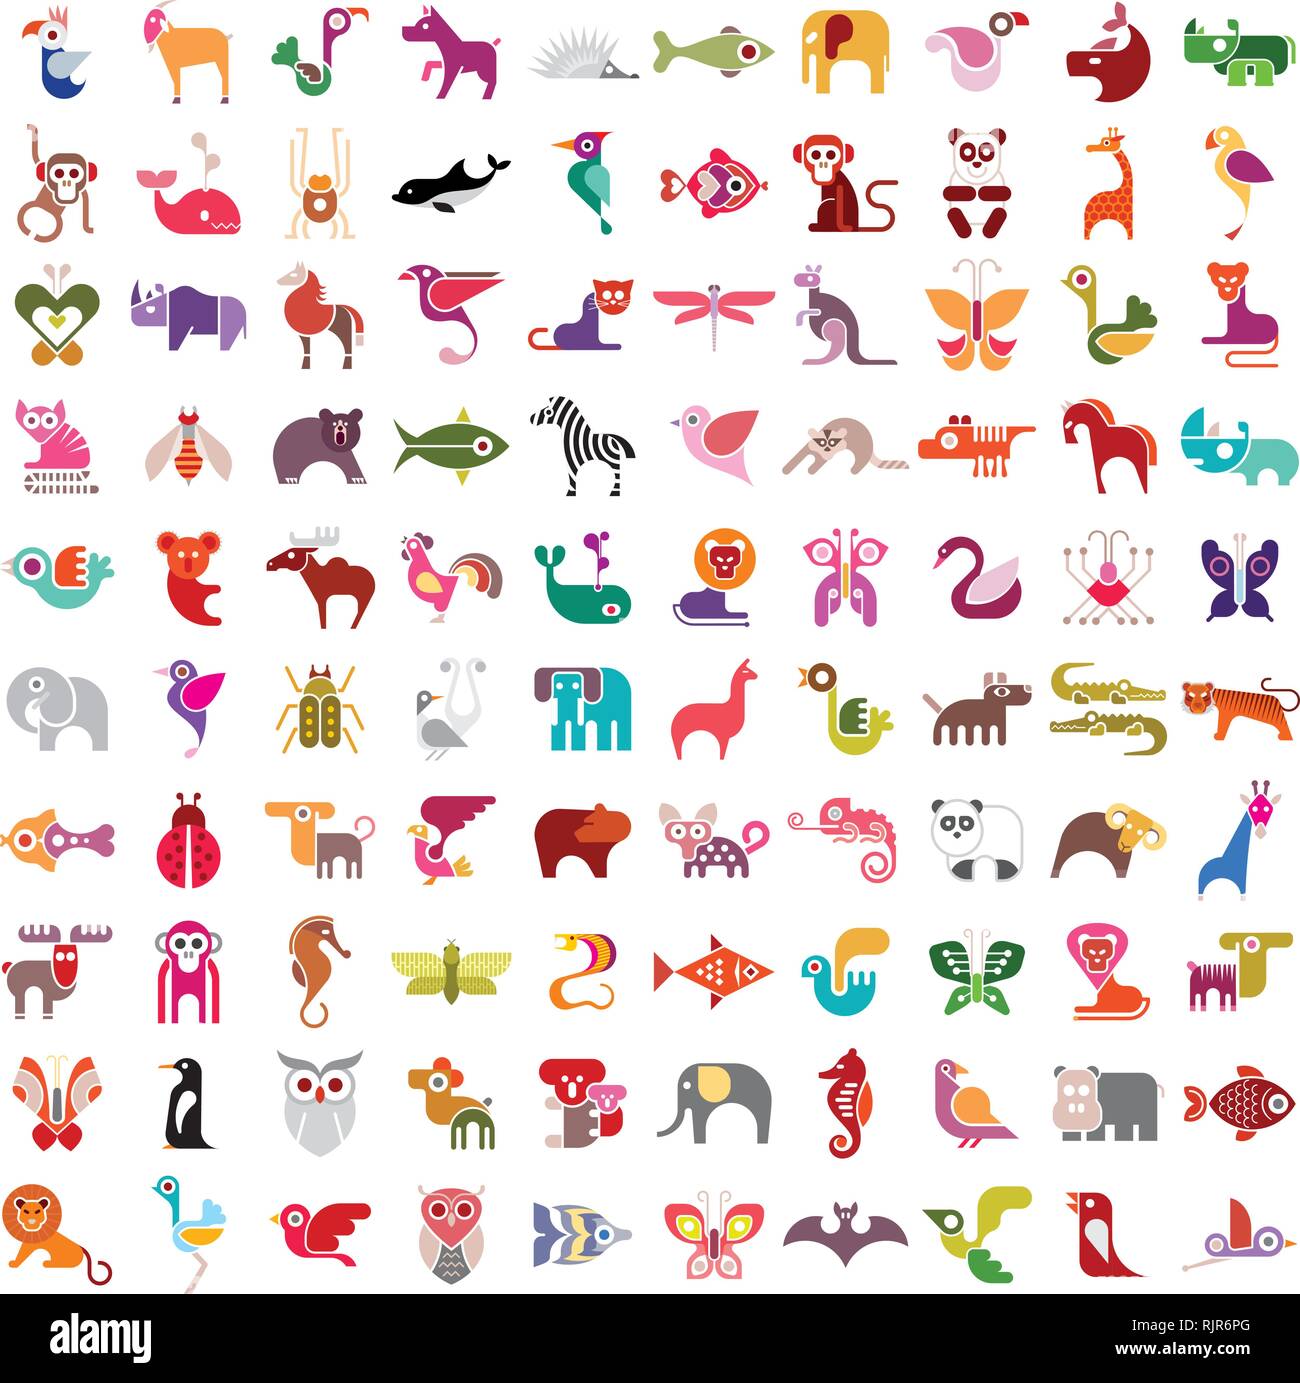 Animals, birds, fishes and insects large vector icon set. Various isolated colorful images on white background. Stock Vector